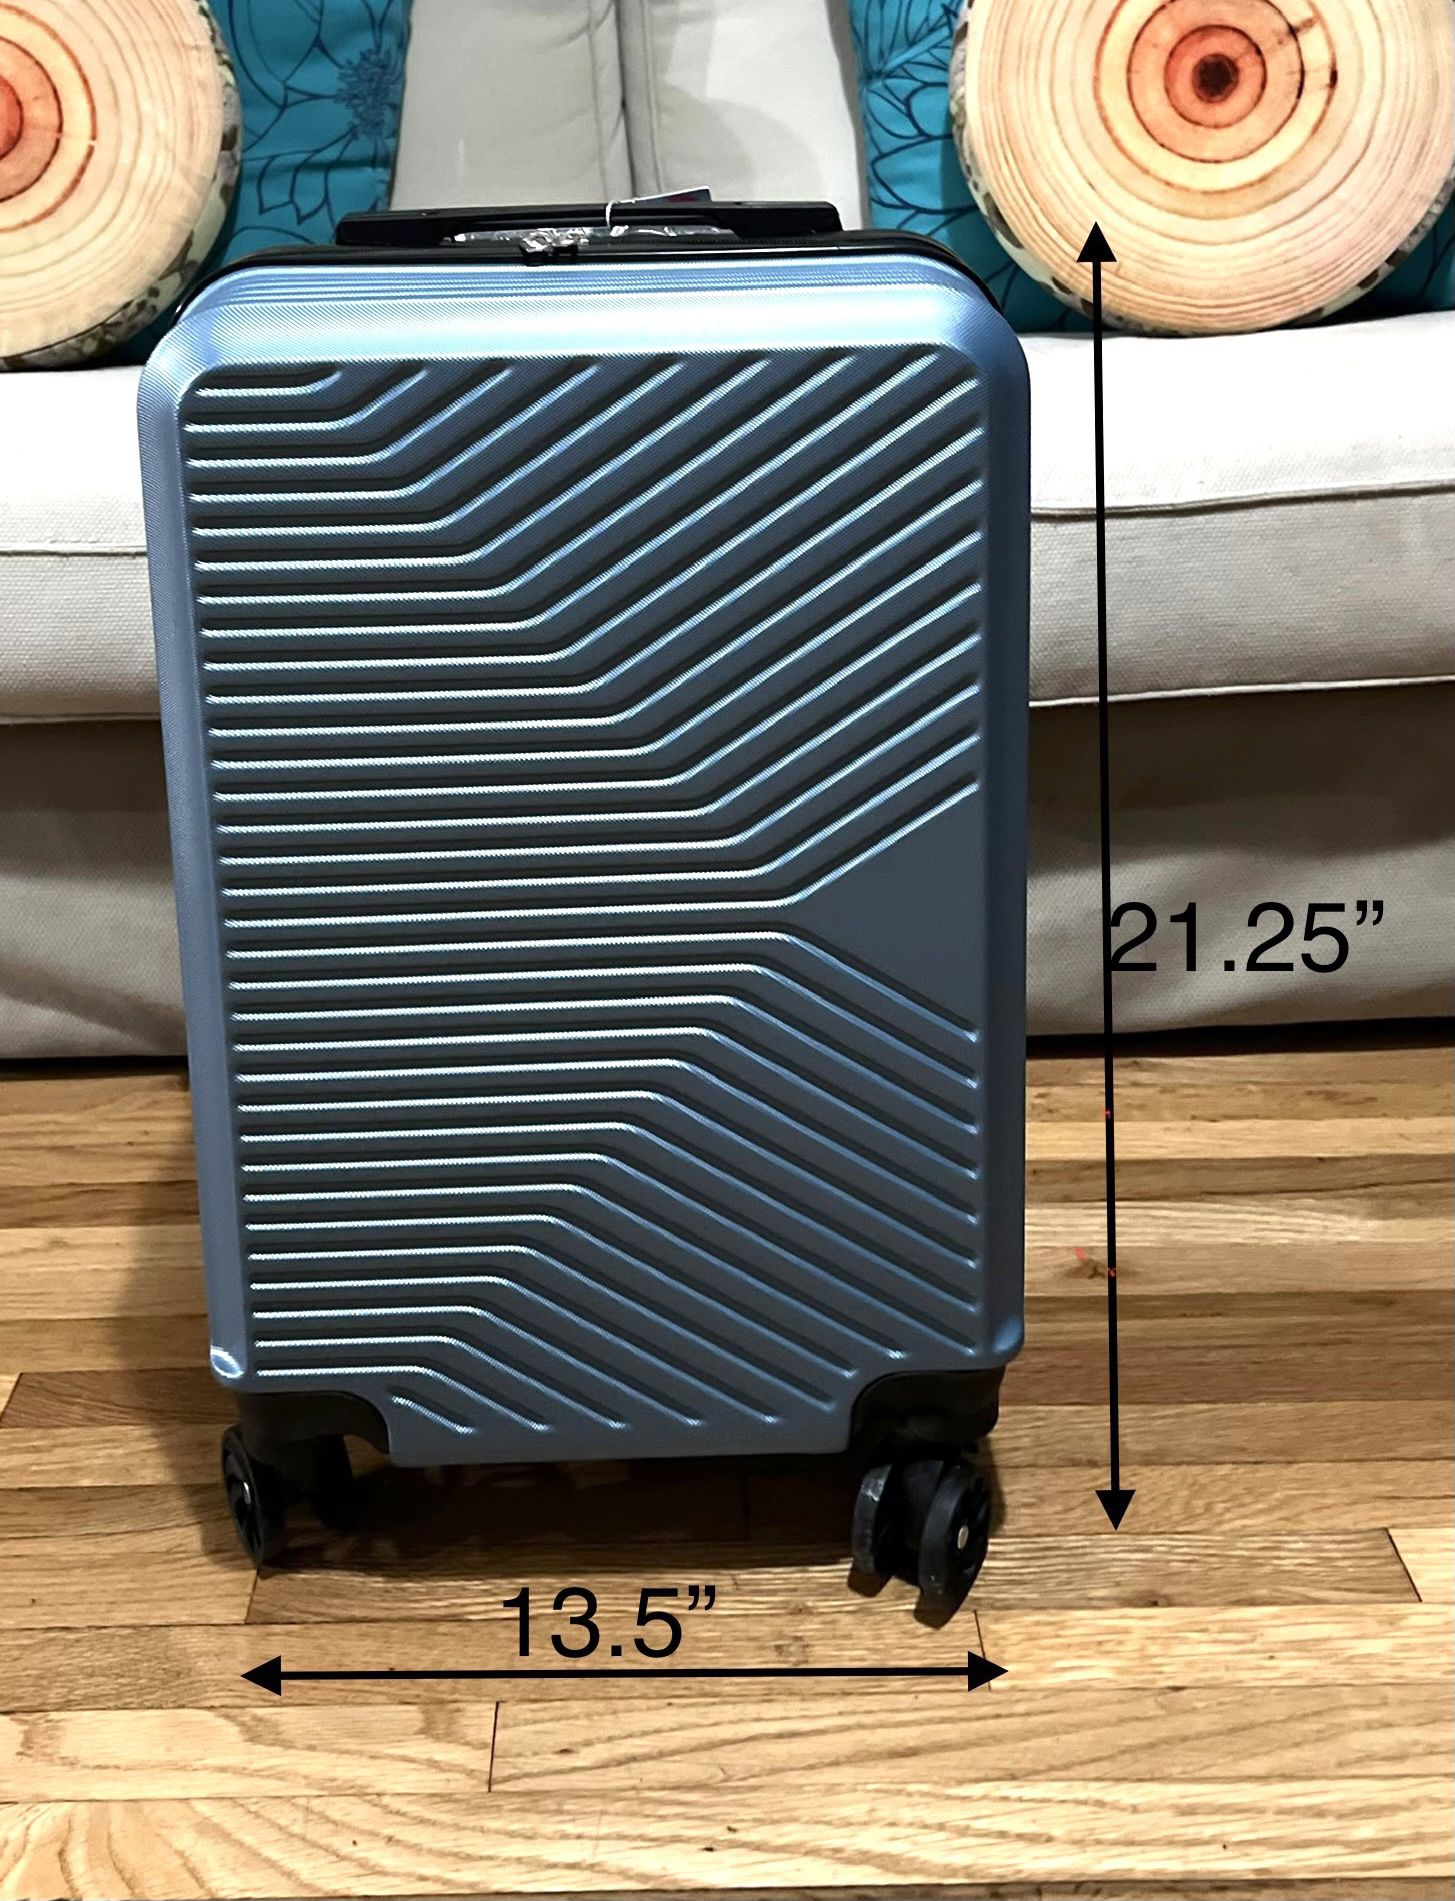 Brand New, Never Used Carry-On Light Weight Travel Luggage On 4-Wheels